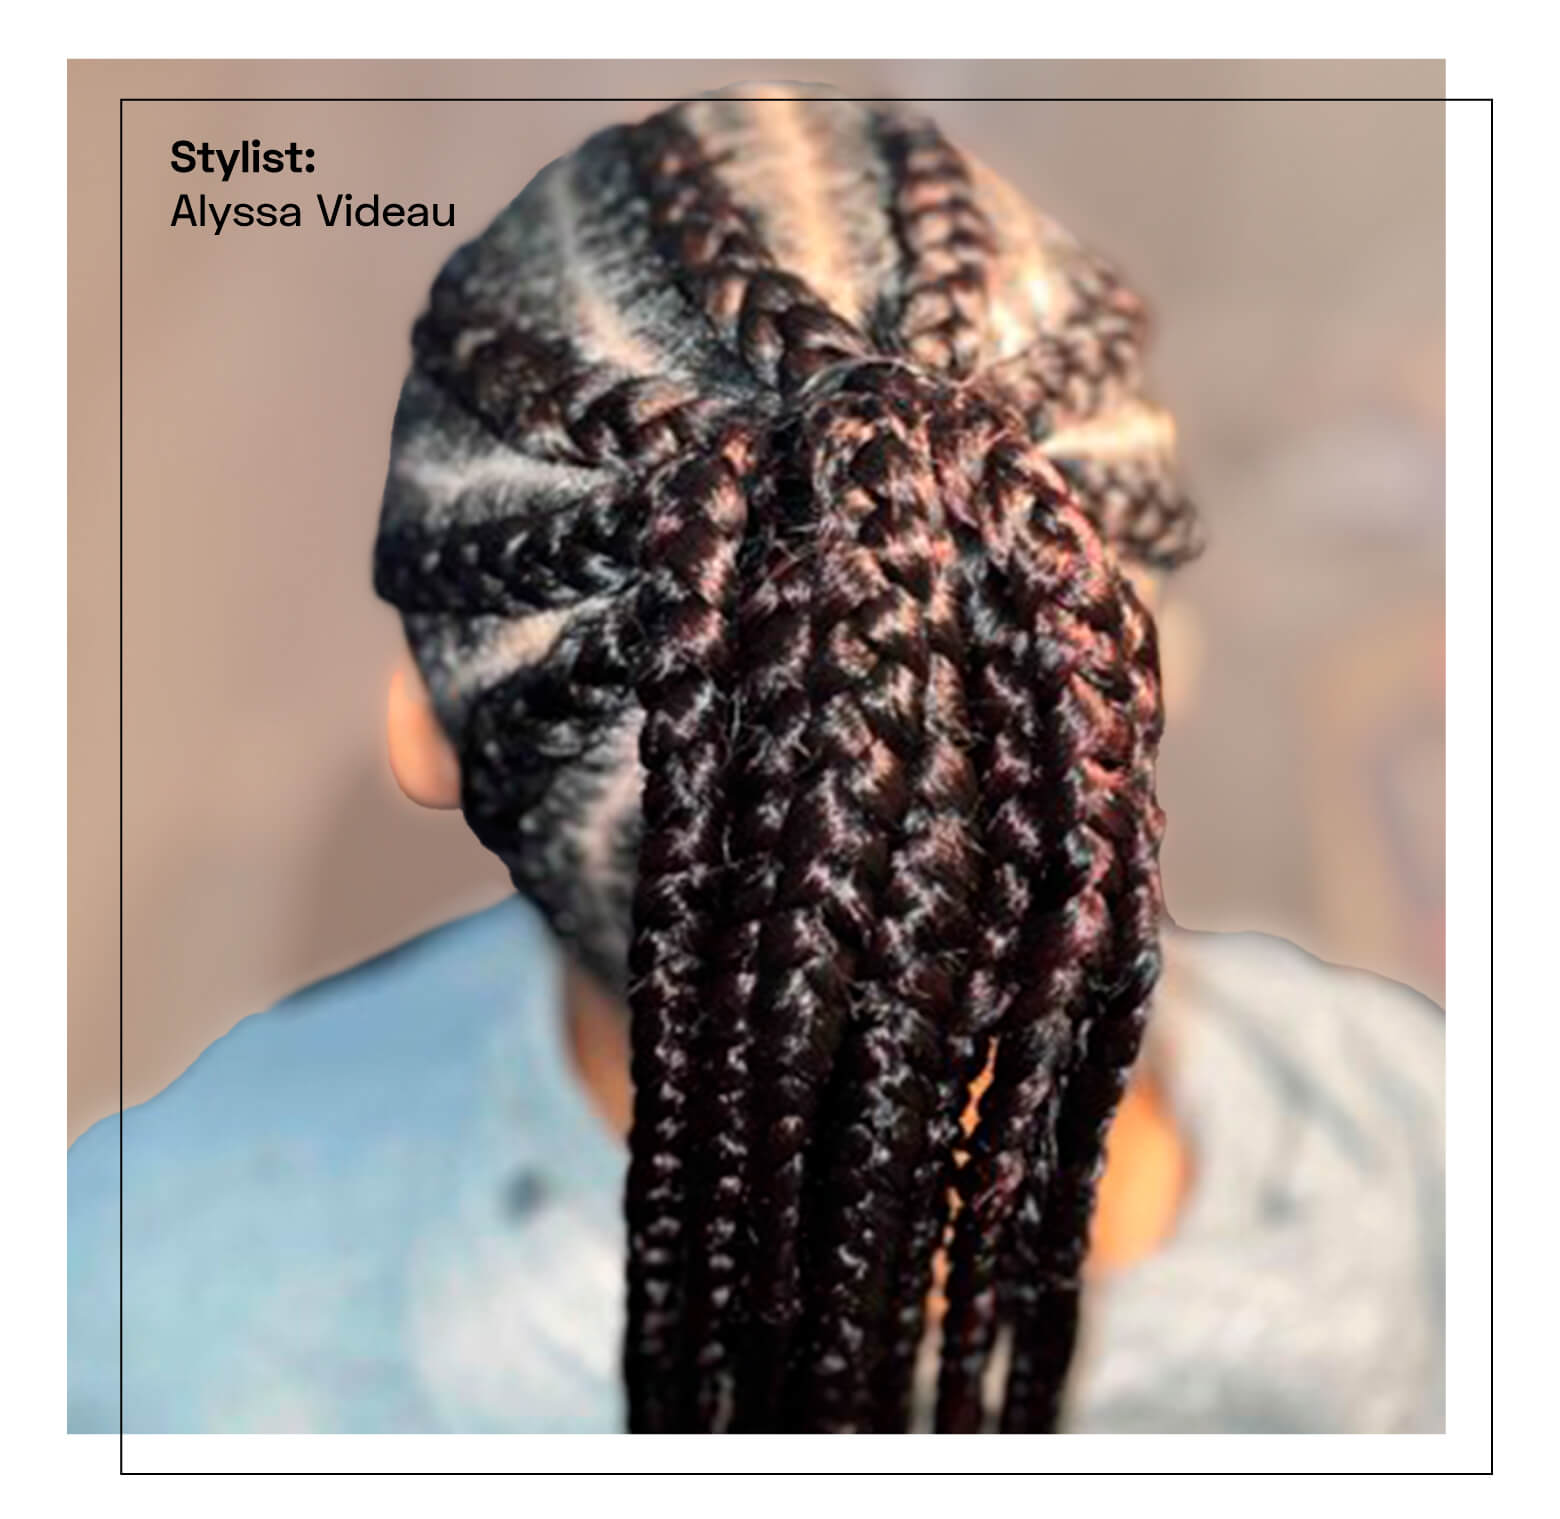 20 stunning tribal braids hairstyles to choose for that revamped look 